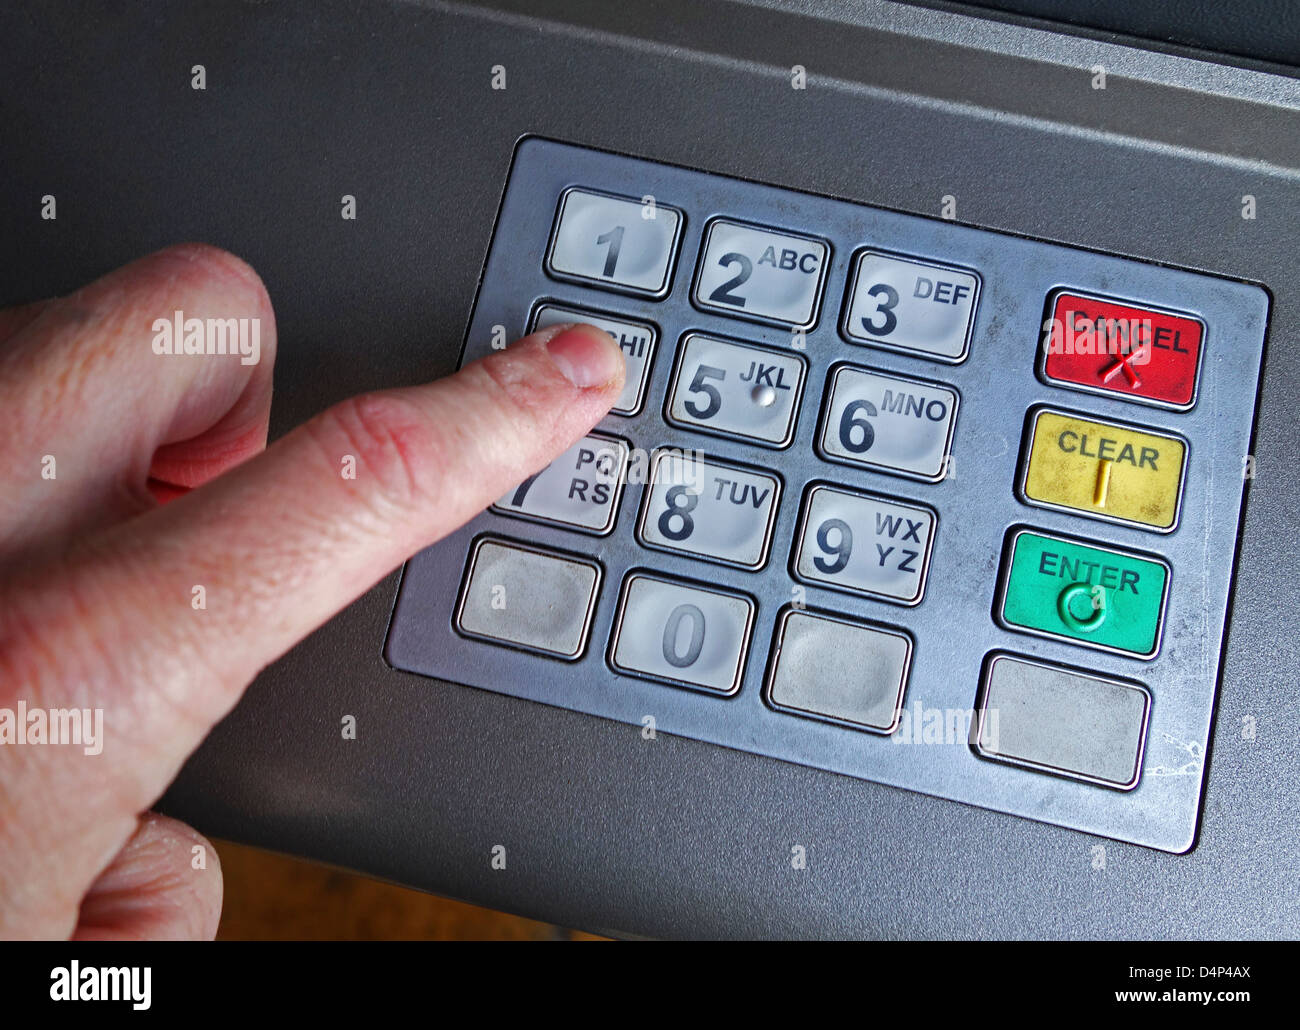 a finger pressing a number on a keypad at an ATM Stock Photo